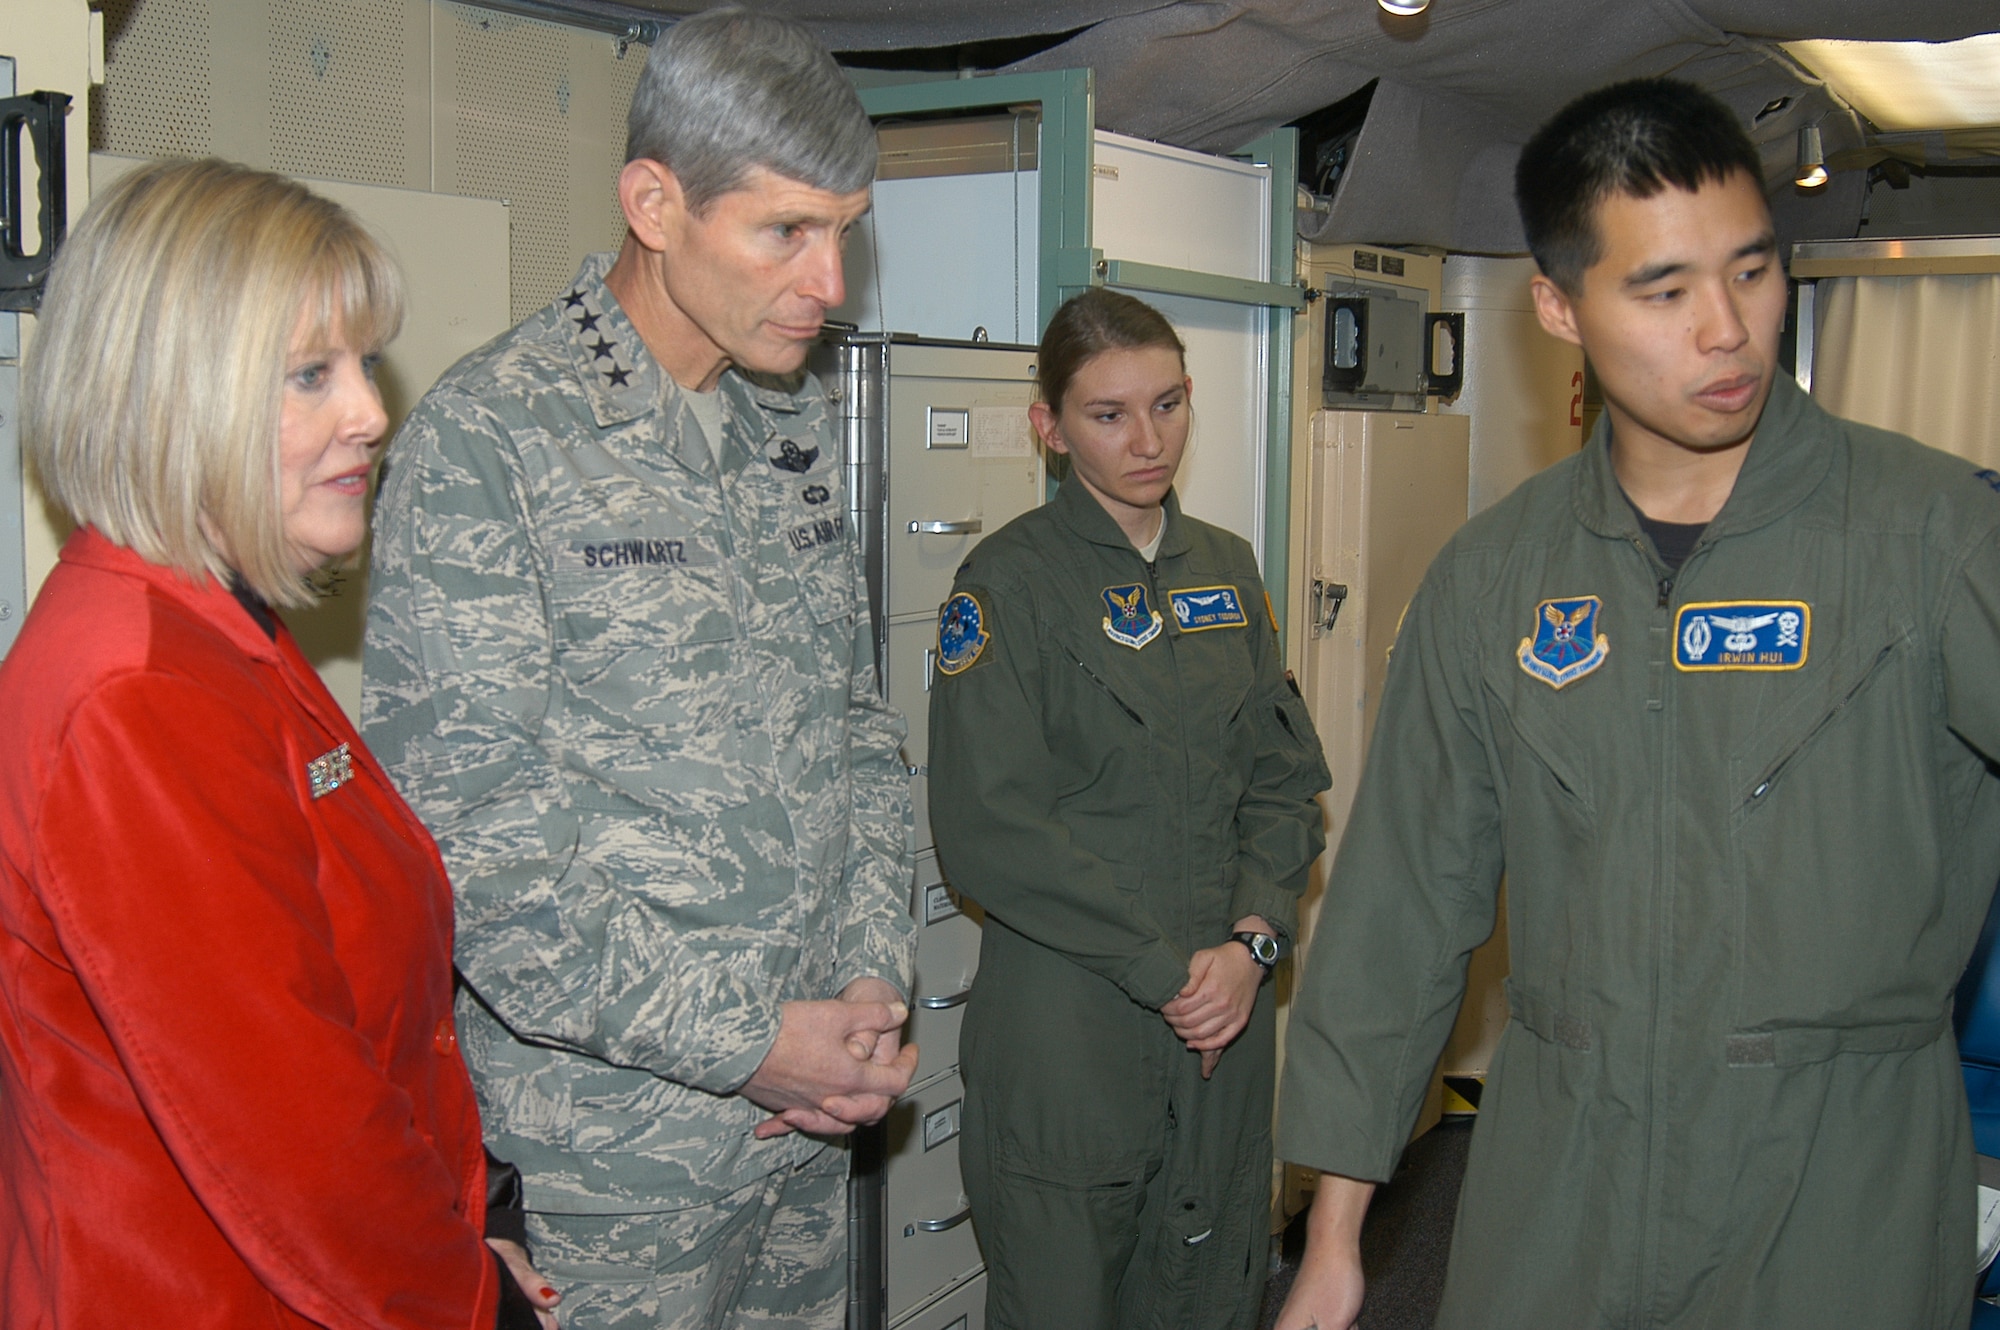 Capt. Irwin Hui (right) and 1st Lt. Sydney Todorov, missile combat crewmembers with the 320th Missile Squadron at F.E. Warren Air Force Base, Wyo., brief Air Force Chief of Staff Gen. Norton Schwartz and Mrs. Schwartz Dec. 25, 2009, inside the launch control center of a missile alert facility.  The general and Mrs. Schwartz visited the base during Christmas to thank Airmen in 24-hour work centers and to reinforce the Air Force's commitment to the nuclear enterprise.  (U.S. Air Force photo/Capt. Mary Danner)